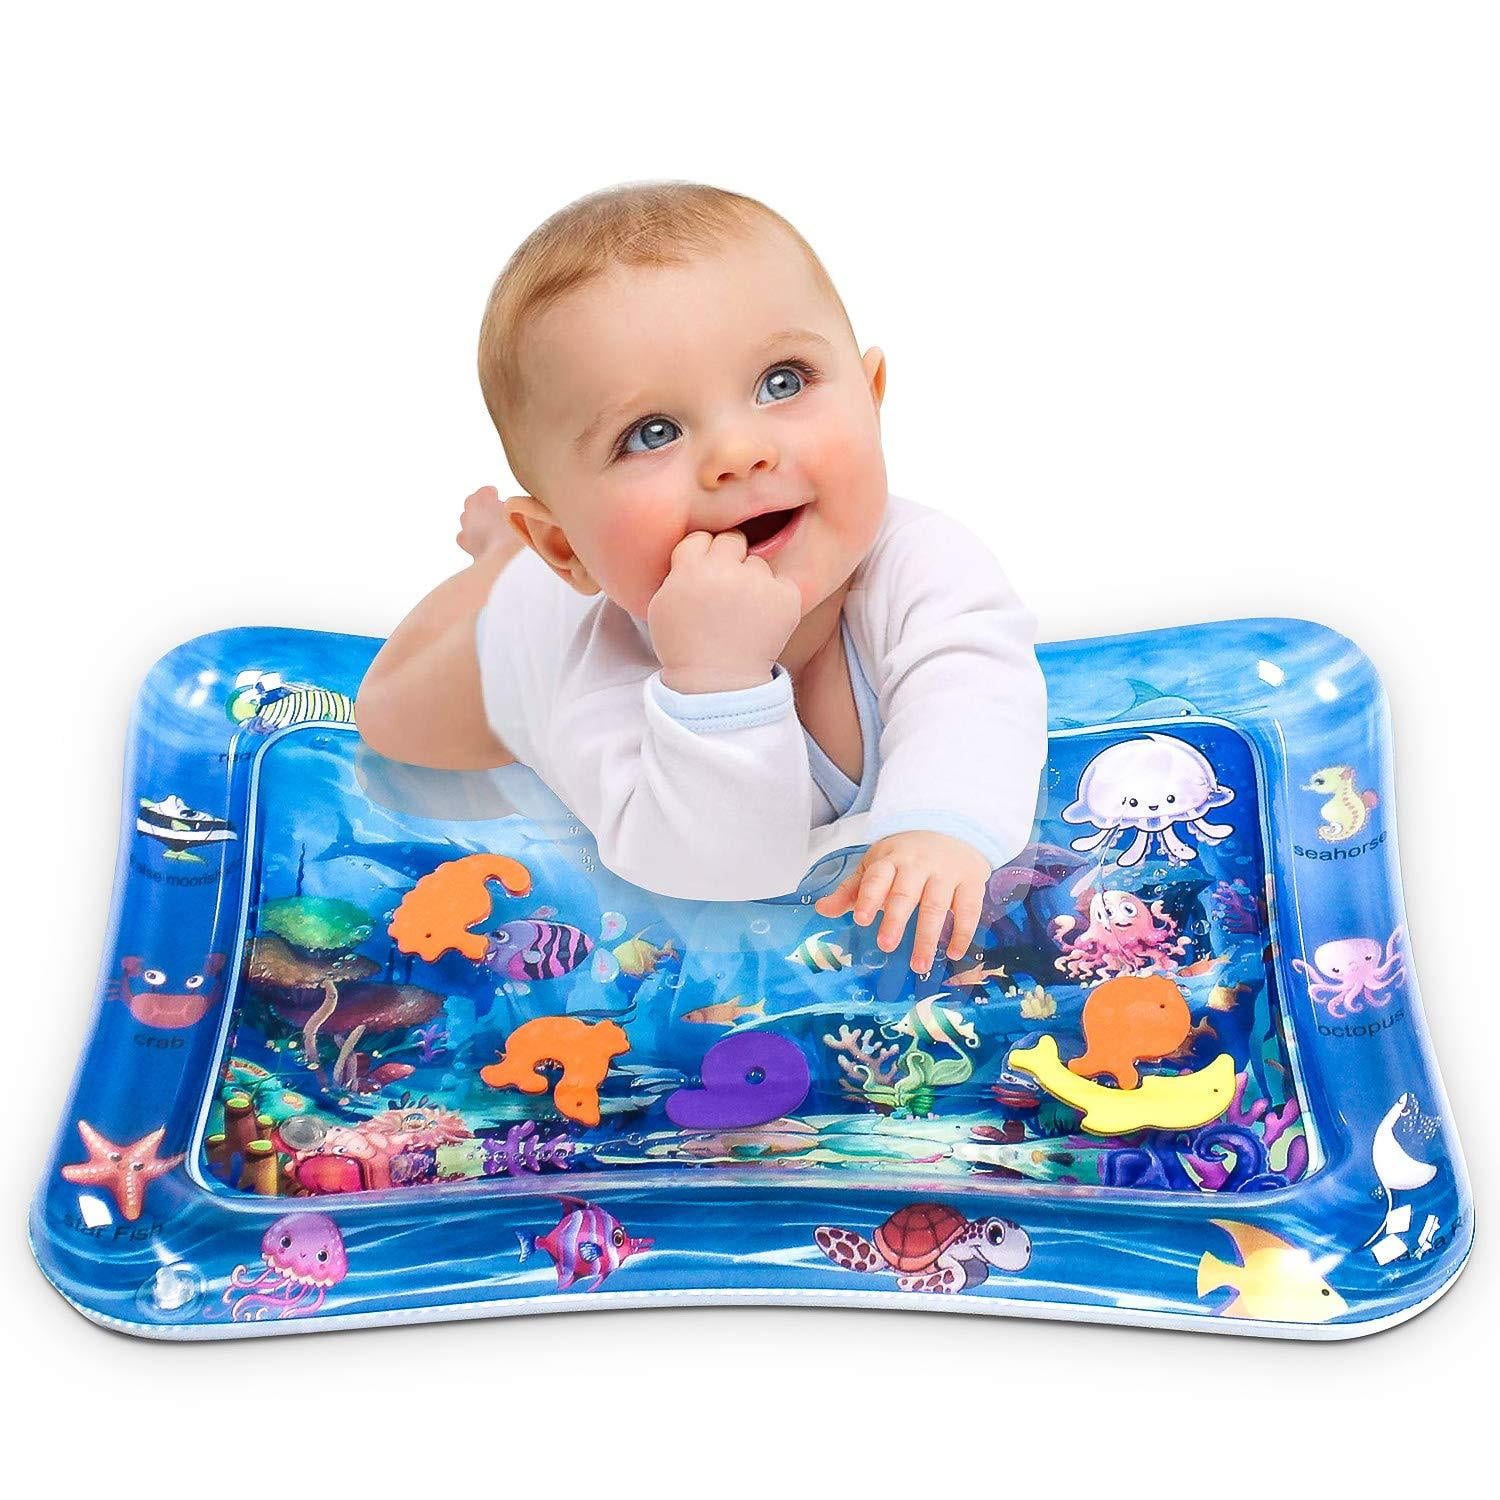 Dycsin Tummy Time Baby Water Mat Inflatable Play Mat Toy Big Size 39 by 31” Infants Toddlers Fun Activity Play Center for Toddler 3 6 9 12 Months Newborn Boy Girl 